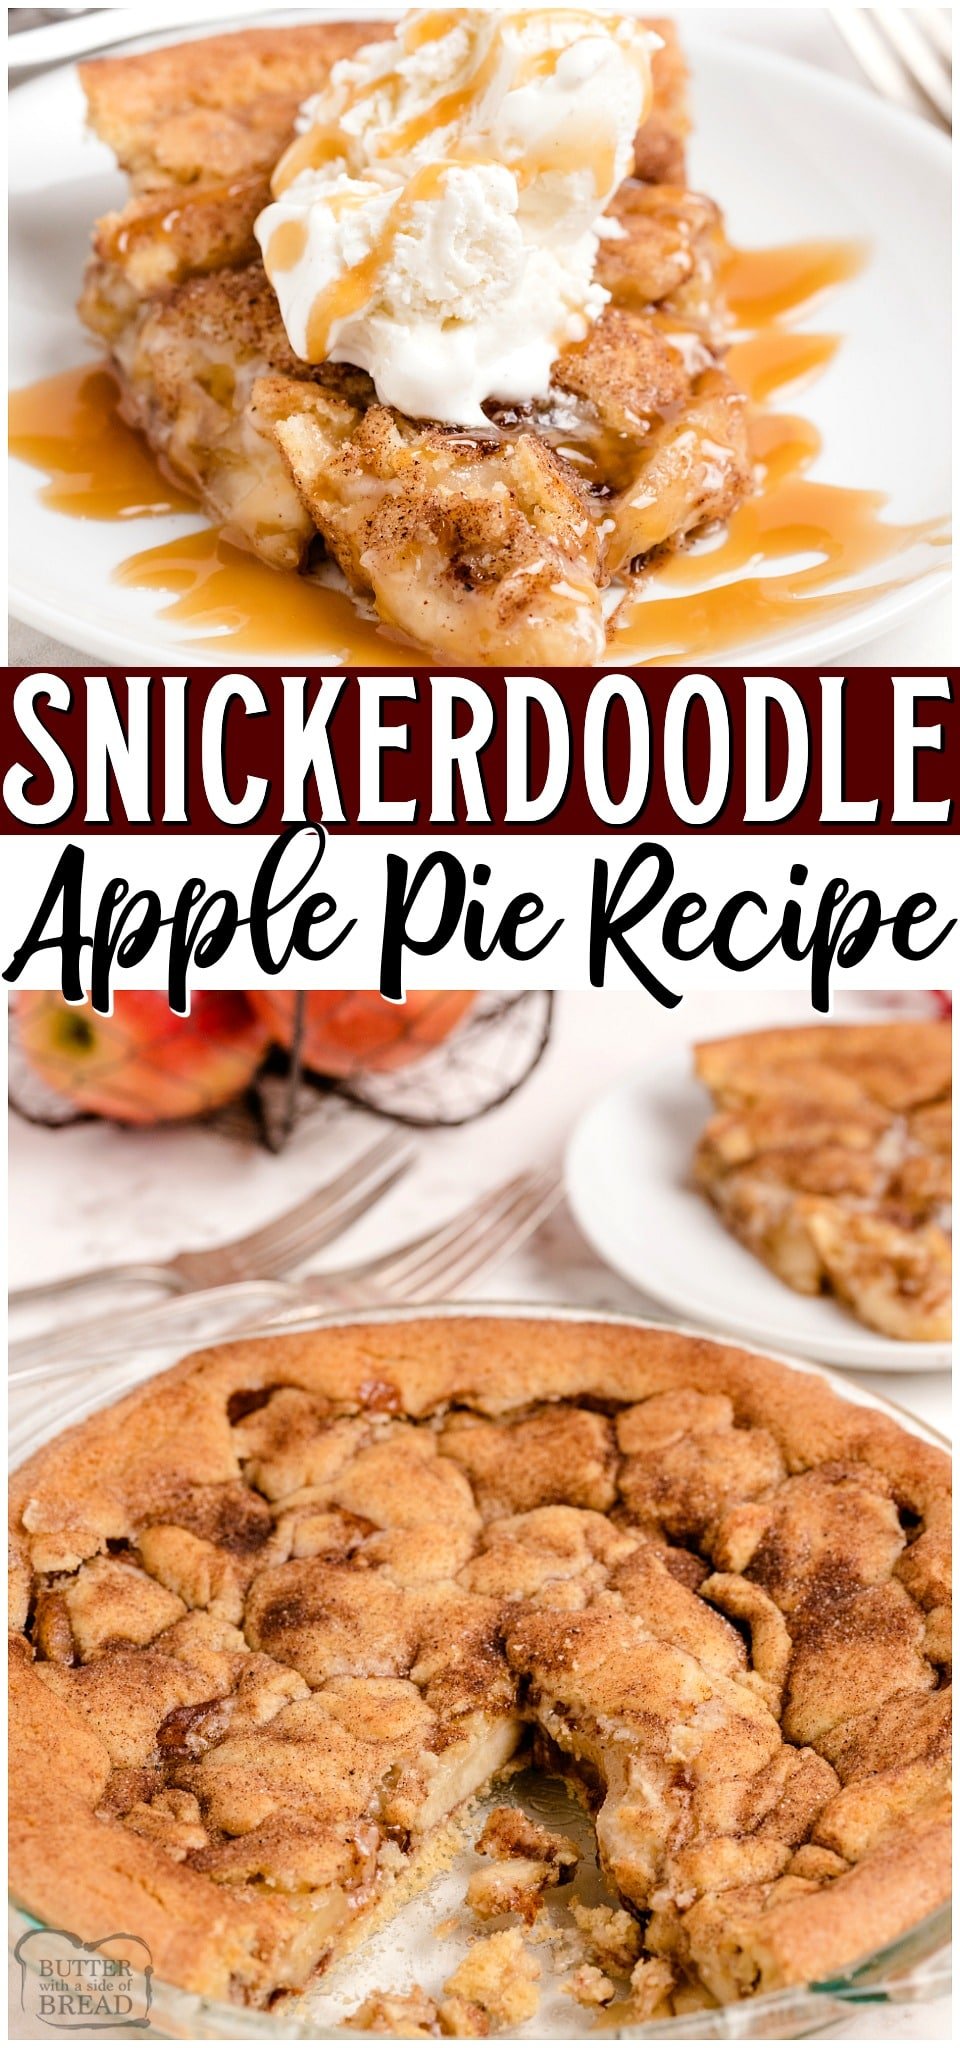 Snickerdoodle Apple Pie is a variation on classic Snickerdoodle cookies + apple pie! This fun take on a traditional apple pie recipe is perfect for Snickerdoodle lovers! #apples #applepie #Snickerdoodles #baking #dessert #easyrecipe from BUTTER WITH A SIDE OF BREAD